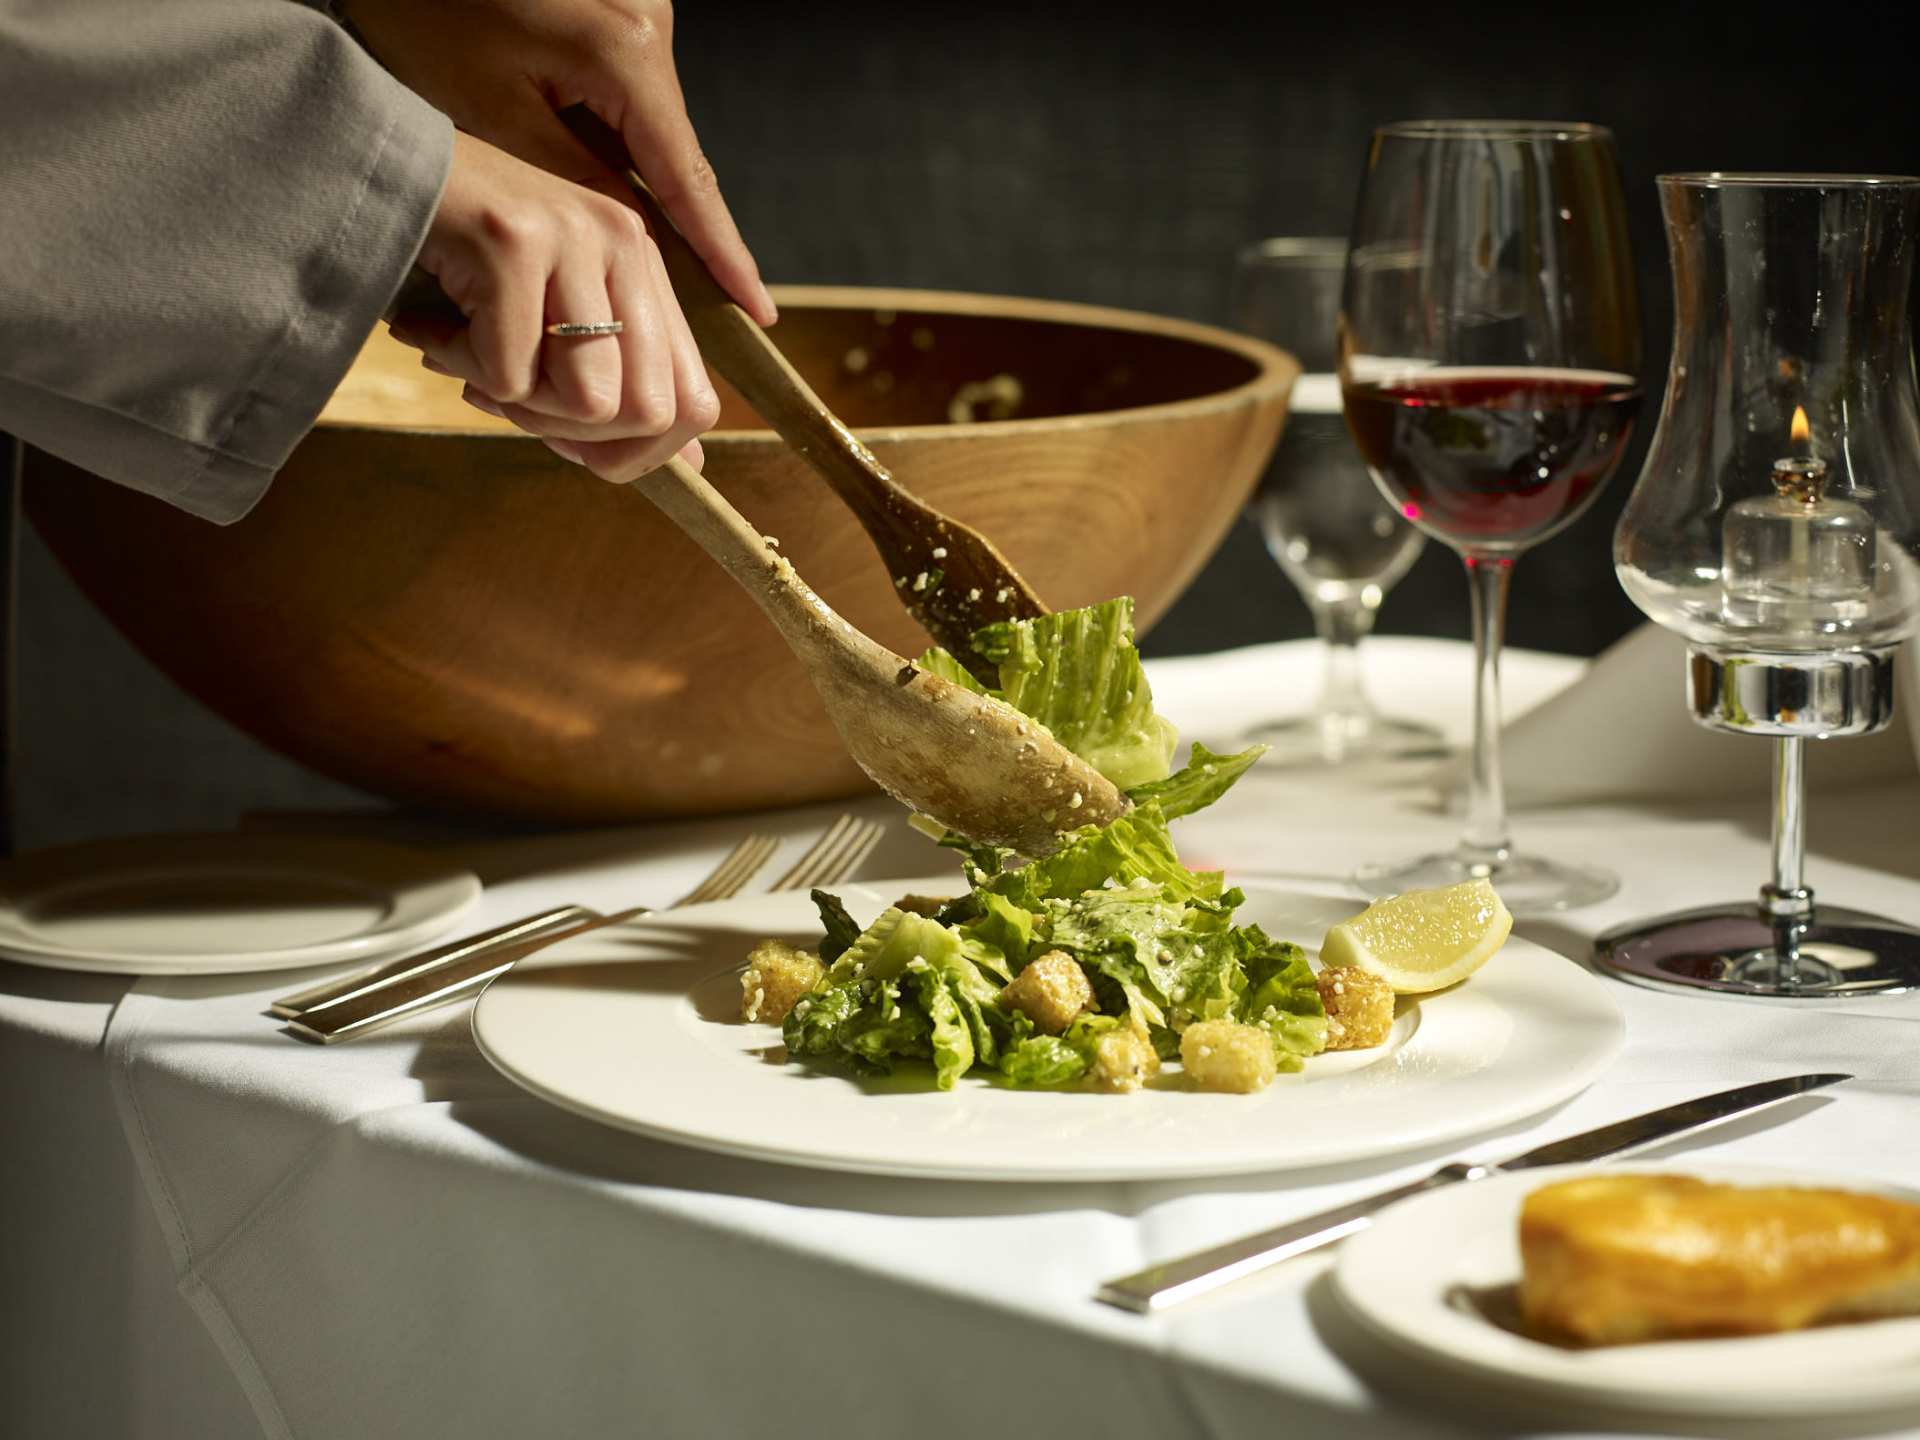 Happy hours in Toronto | A caesar salad tossed tableside at Hy's Steakhouse in Toronto